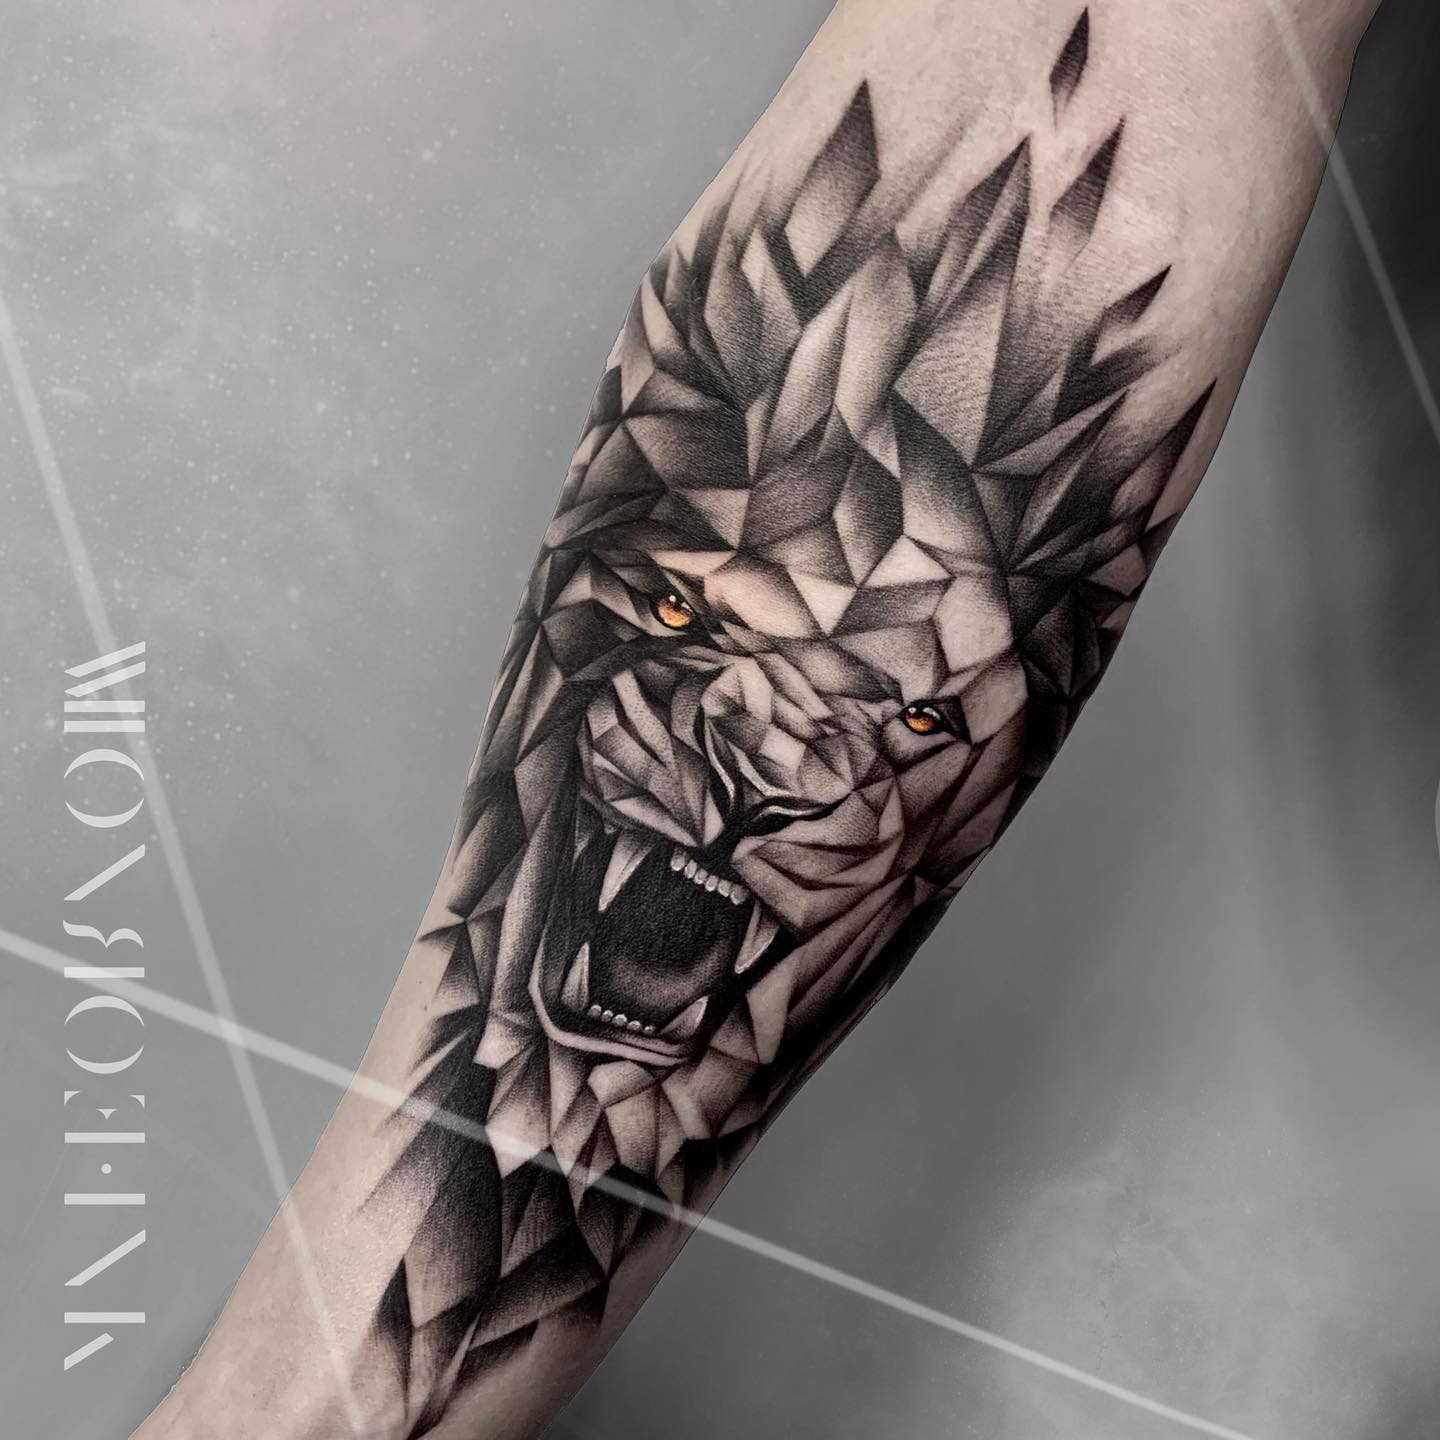 Underworld Tattoo  Lion with crown on calf first tattoo by Tamas   Facebook